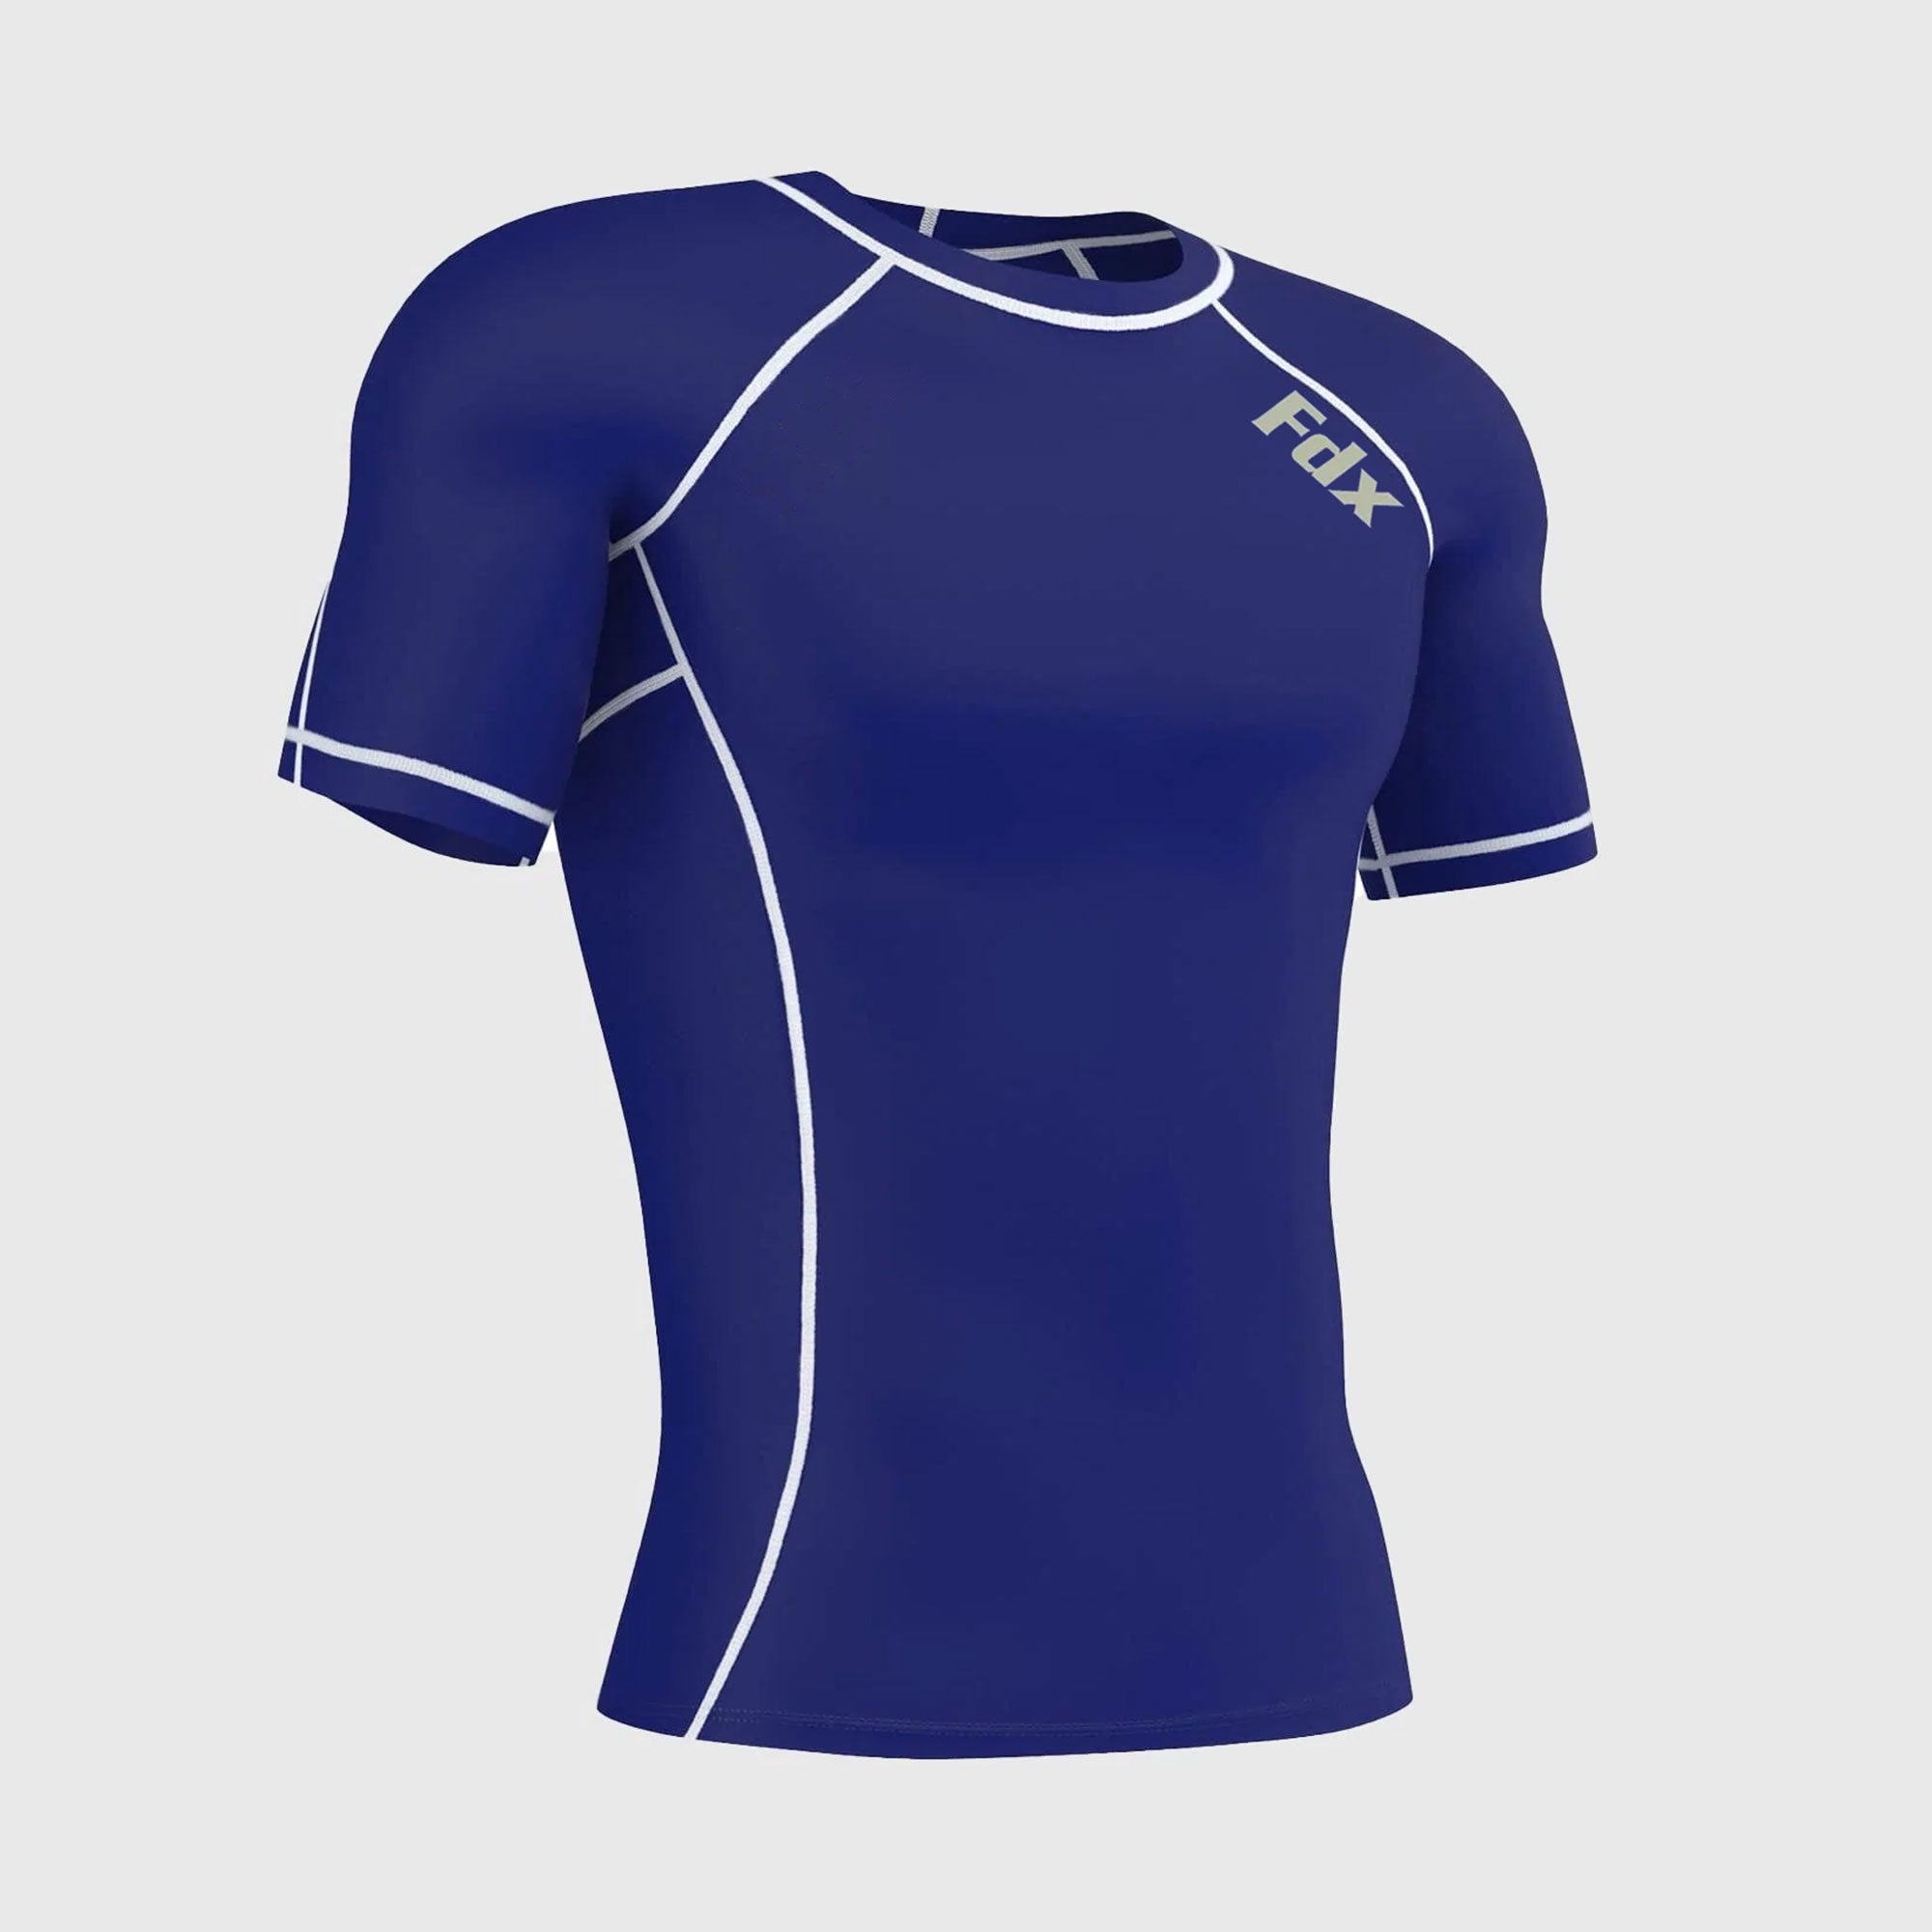 Related: Blue Men 3 Short Sleeve Base Layer Top